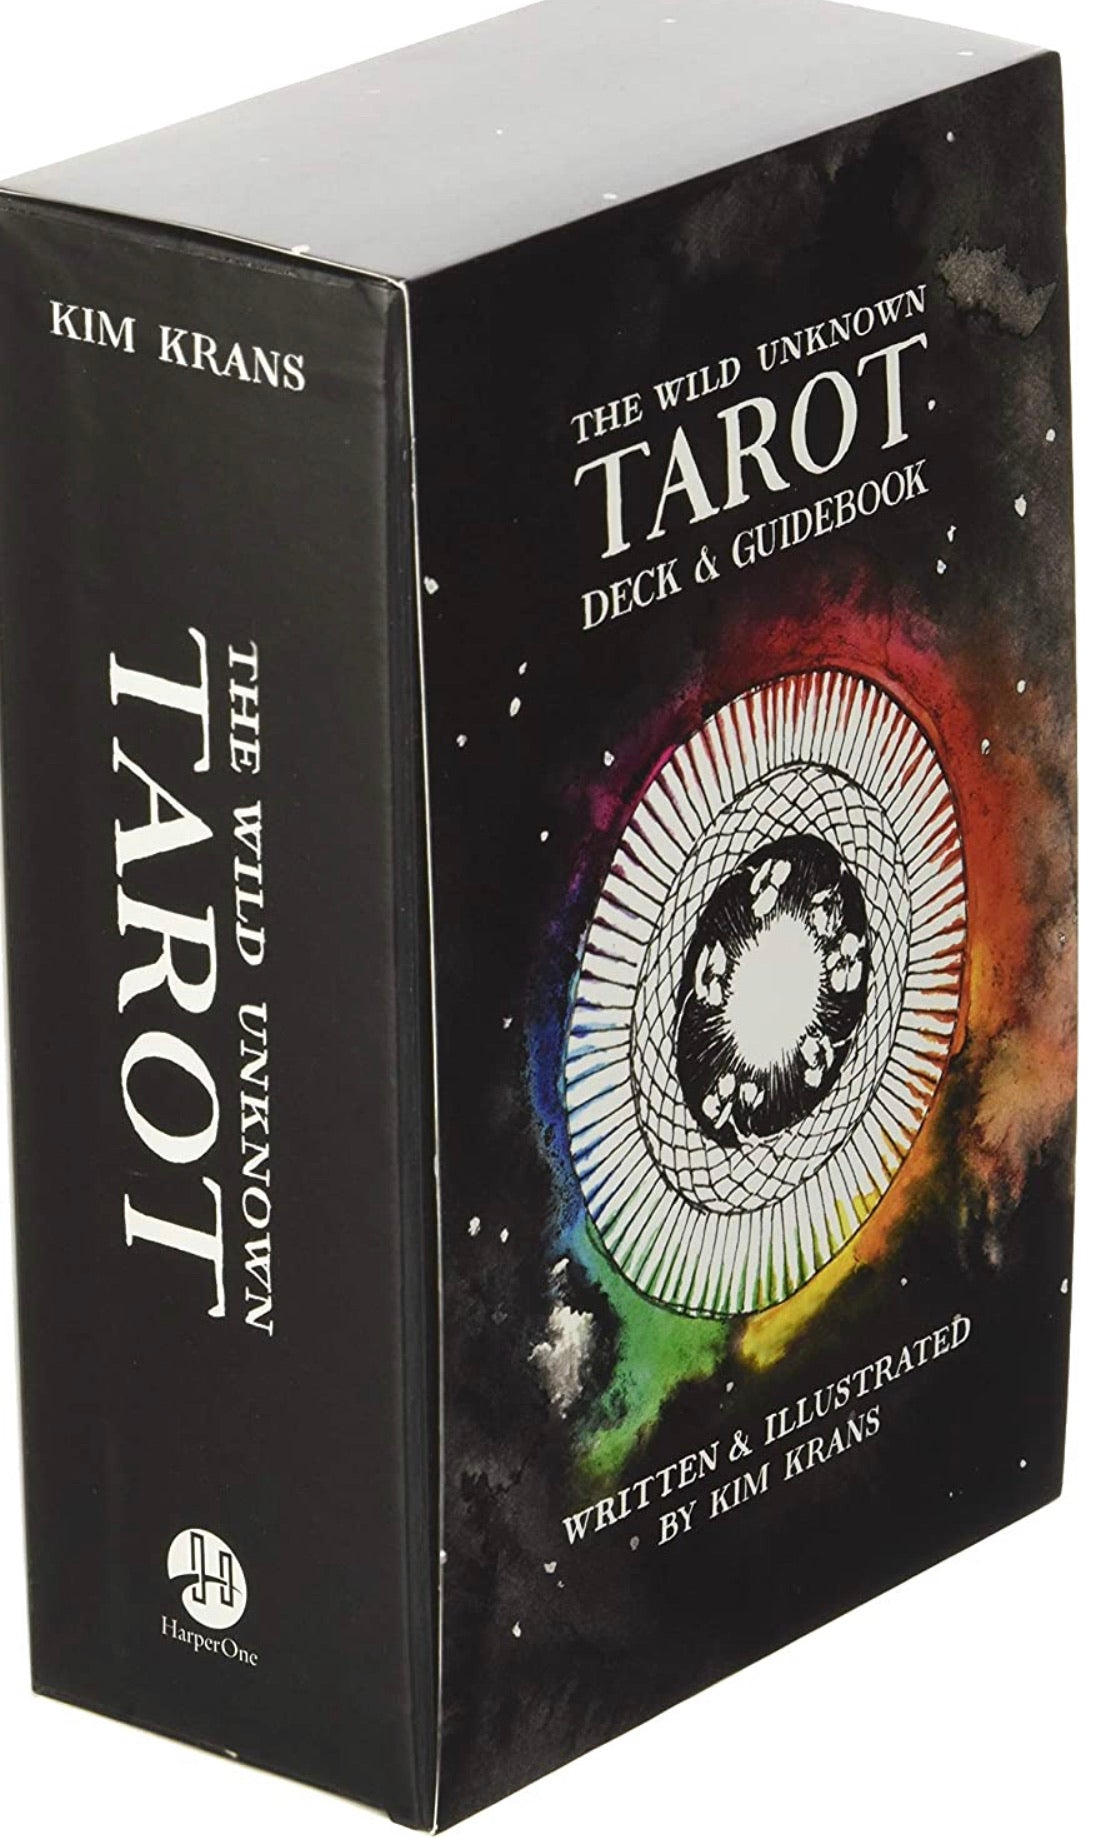 The Wild Unknown Tarot deck and guidebook